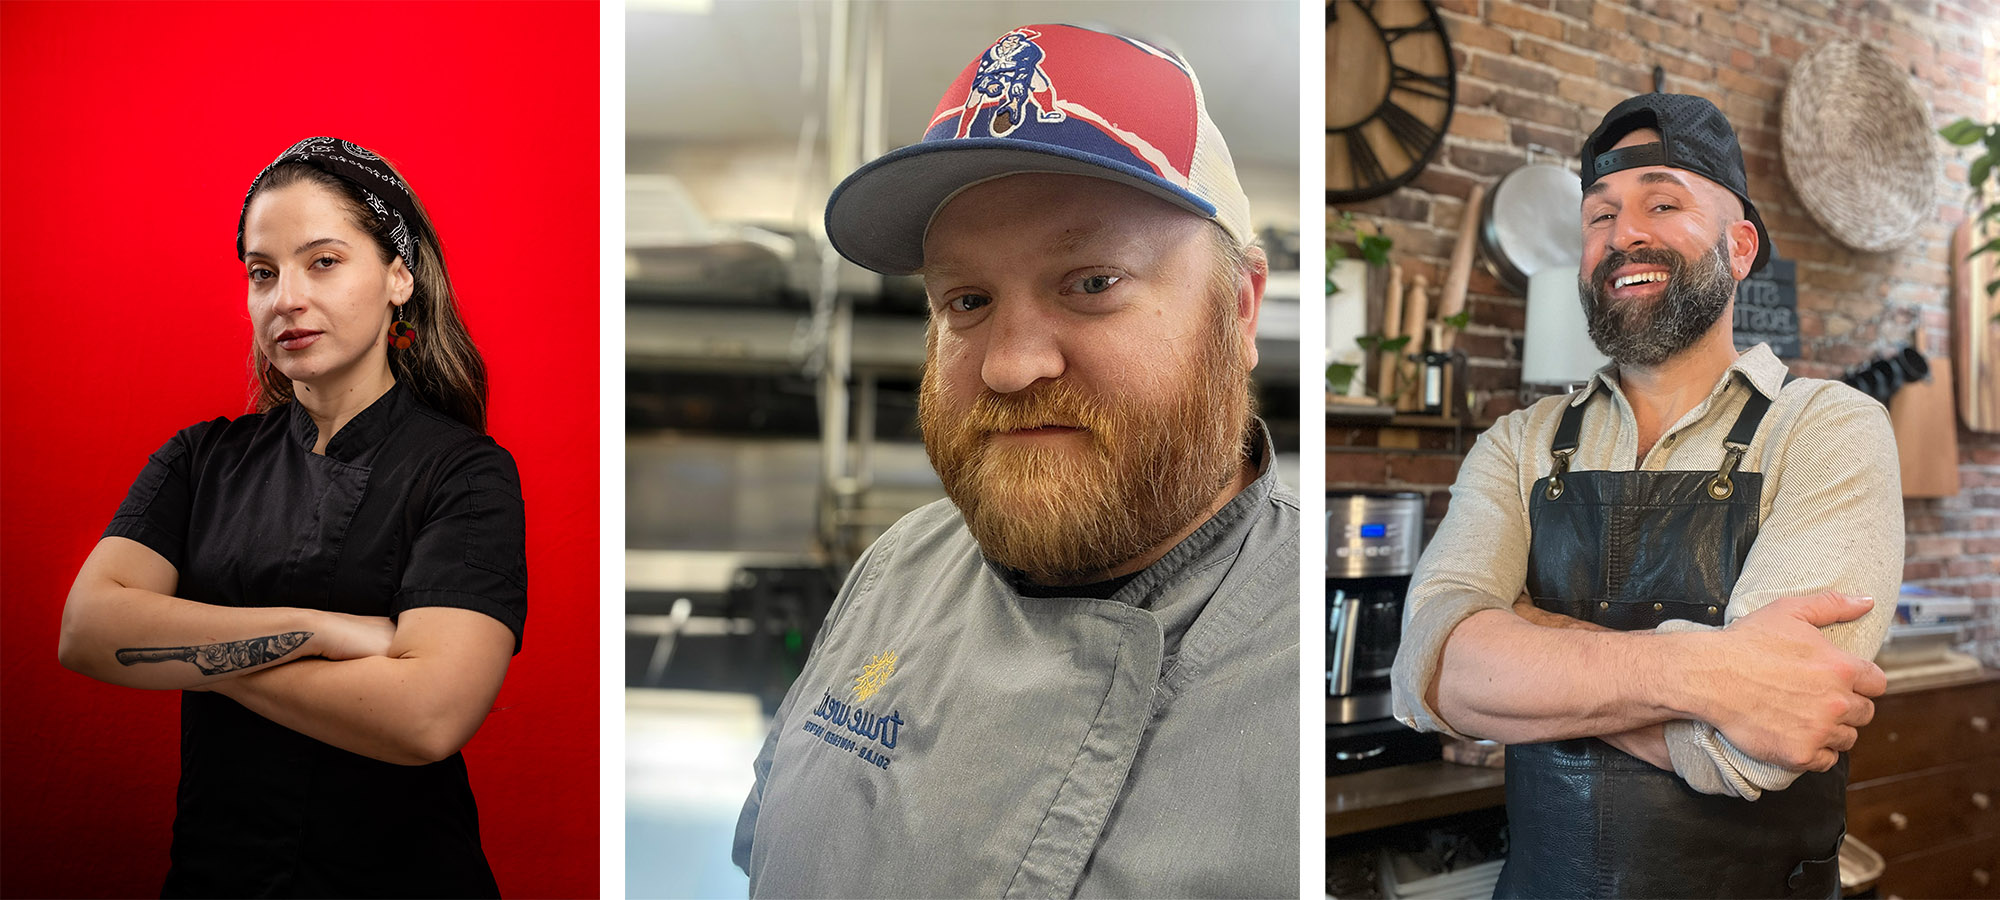 Local chefs (left to right) Viviana Duque, Jonathan Gilman, and Jason Jernigan will compete at the Open Table Chopped for Charity gala